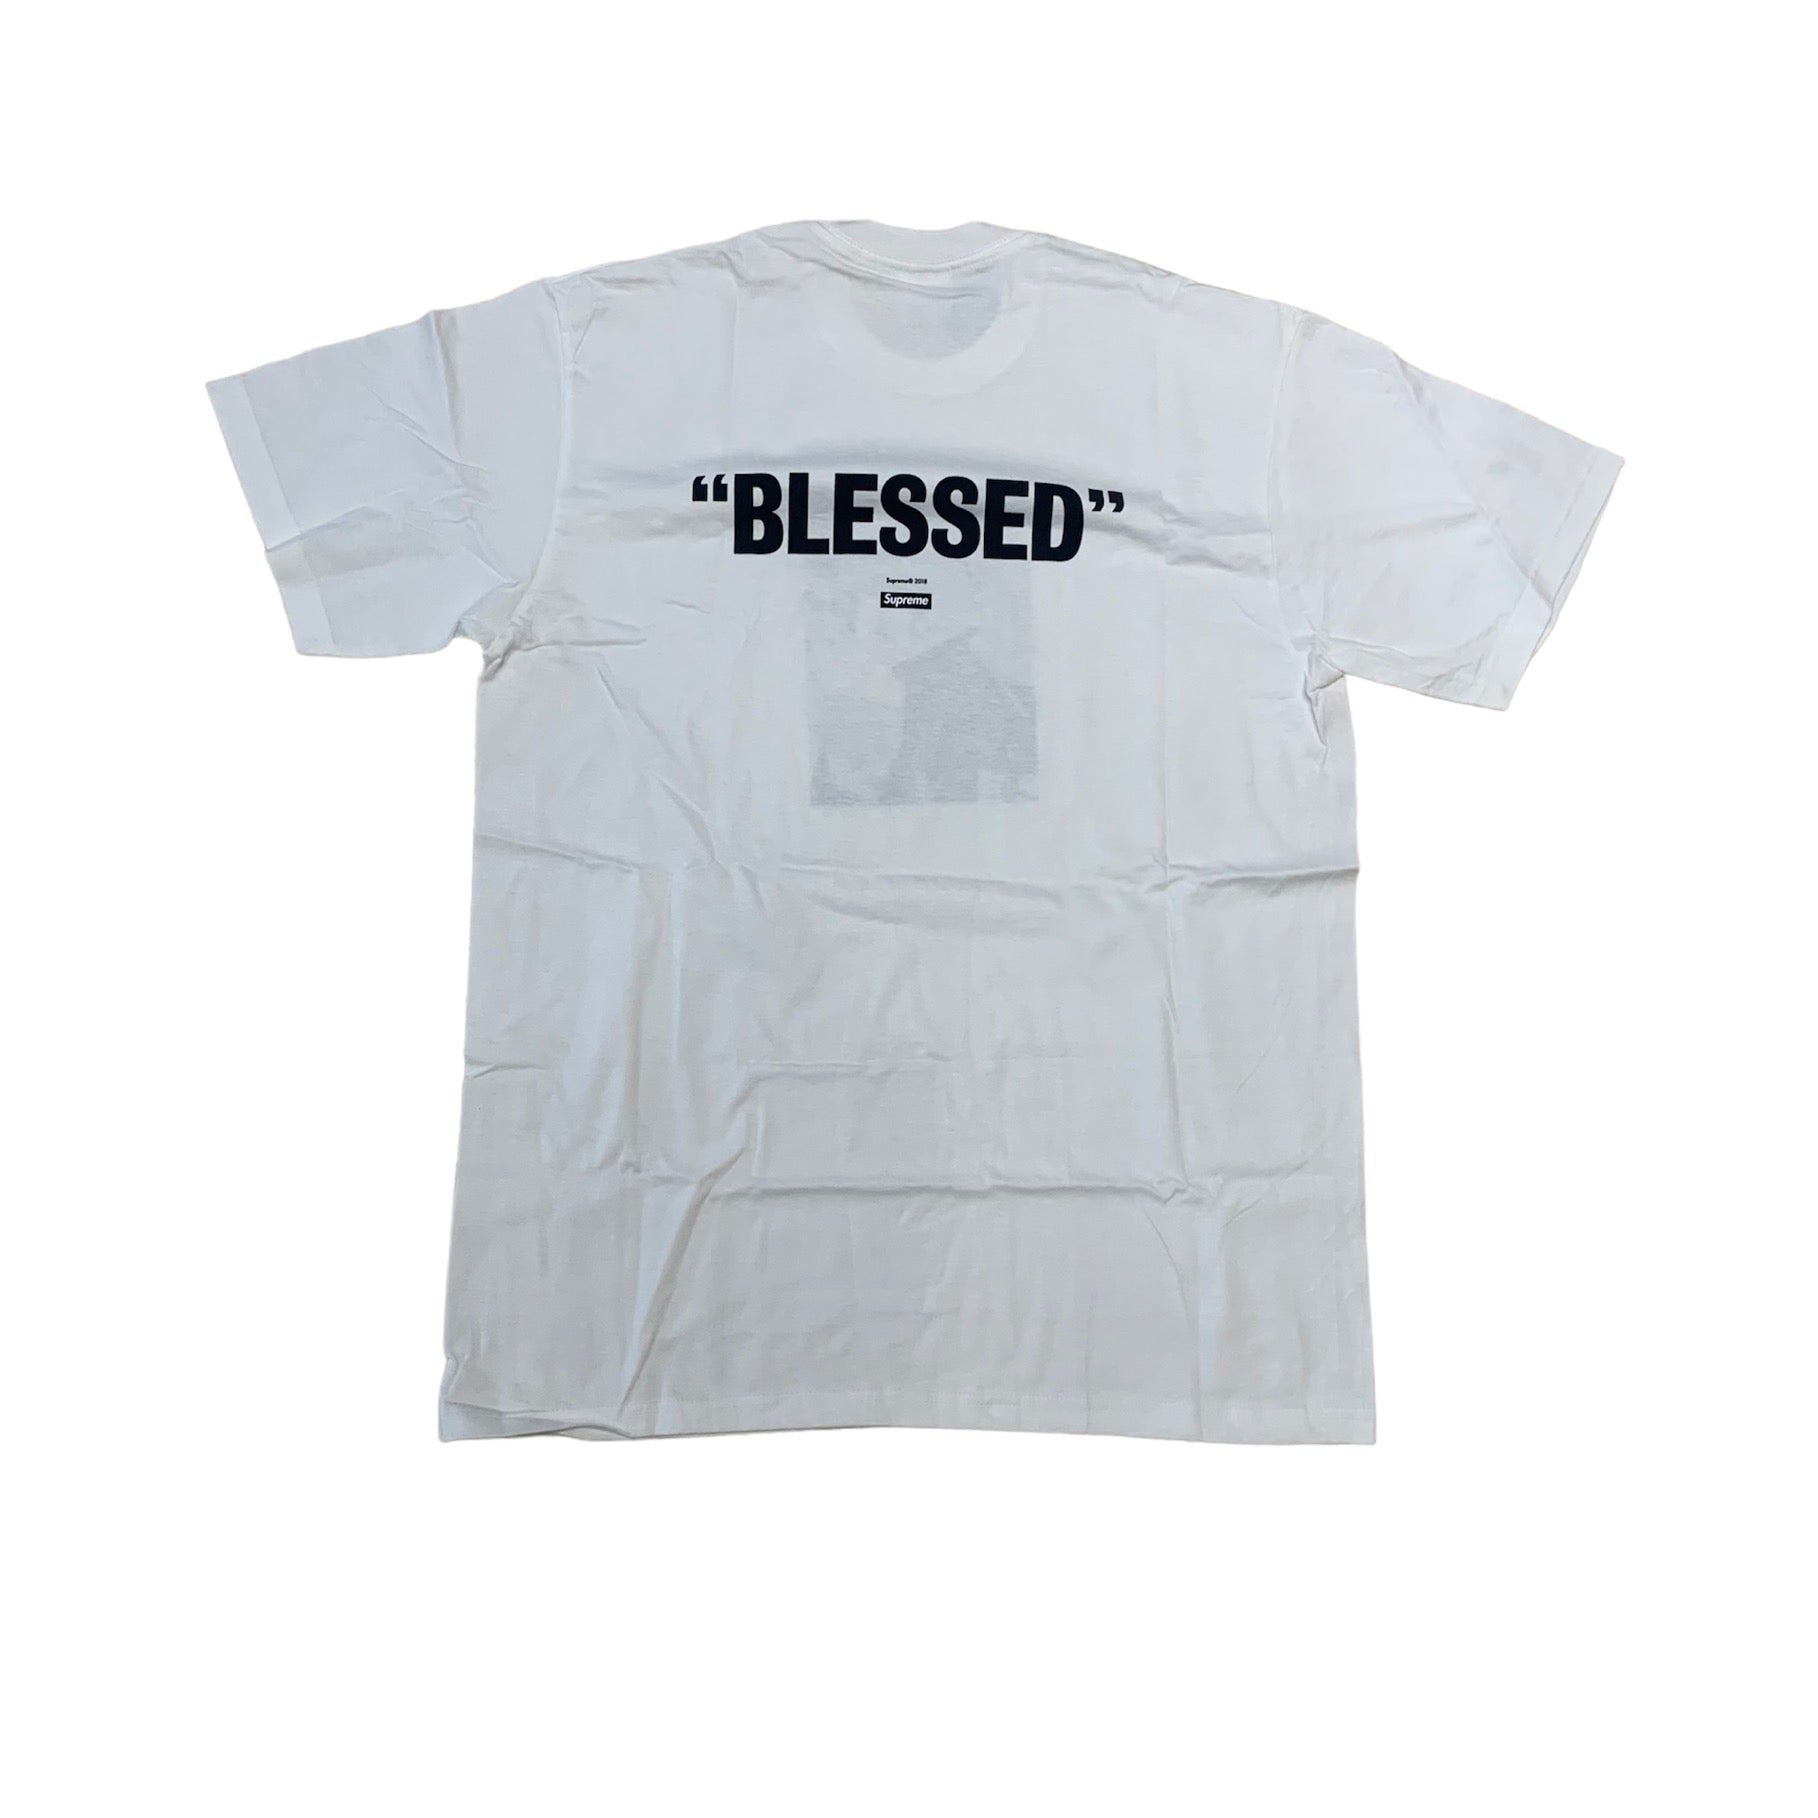 SUPREME “BLESSED” TEE - WHITE